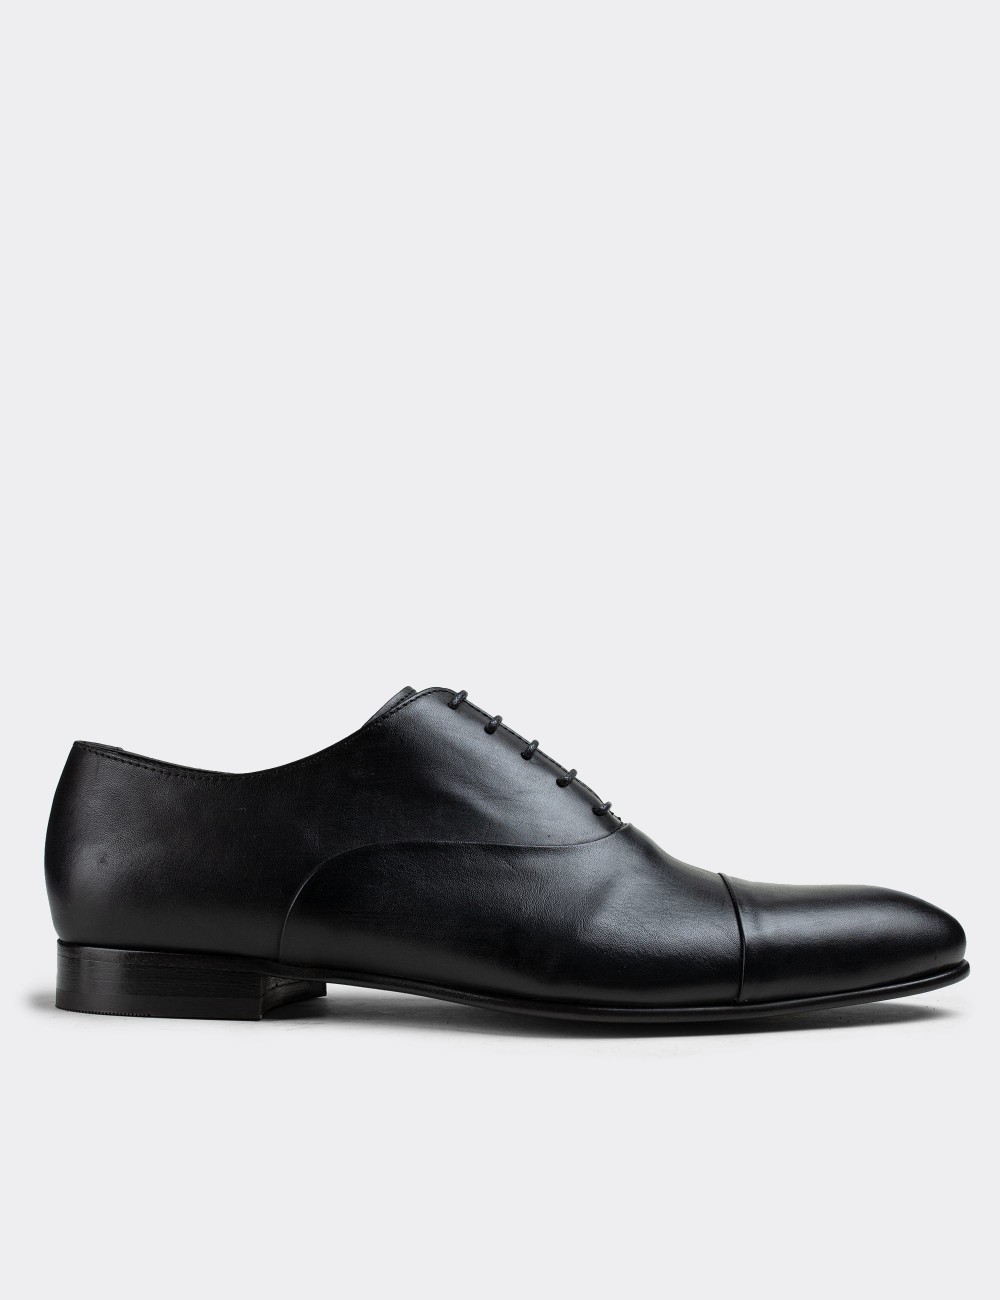 Black  Leather Classic Shoes - 01026MSYHK04